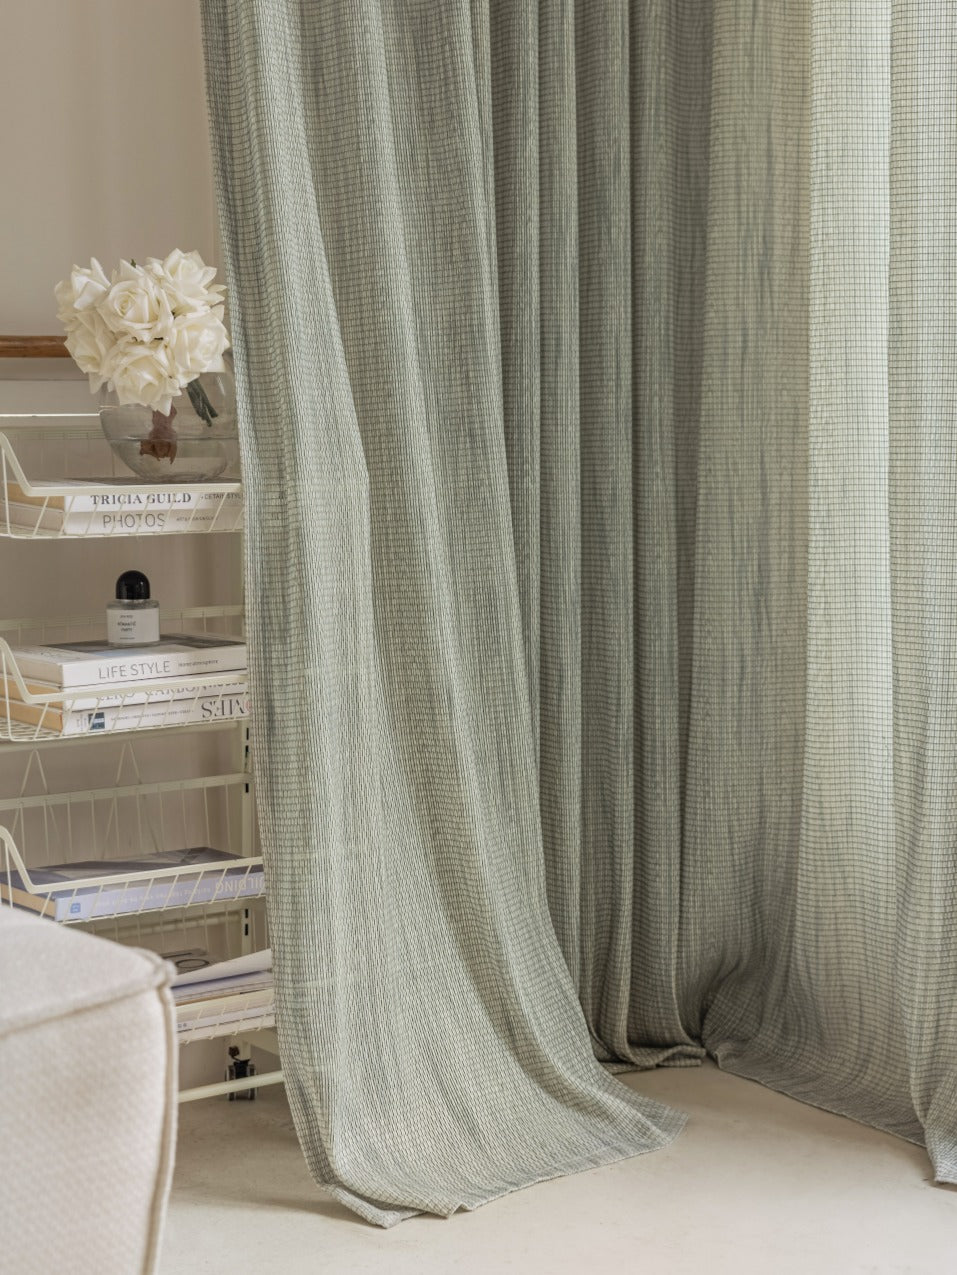 Smoky green sheer curtain with mesh grid design imported from Germany, displayed in a sophisticated living room setting with magazine rack in the background